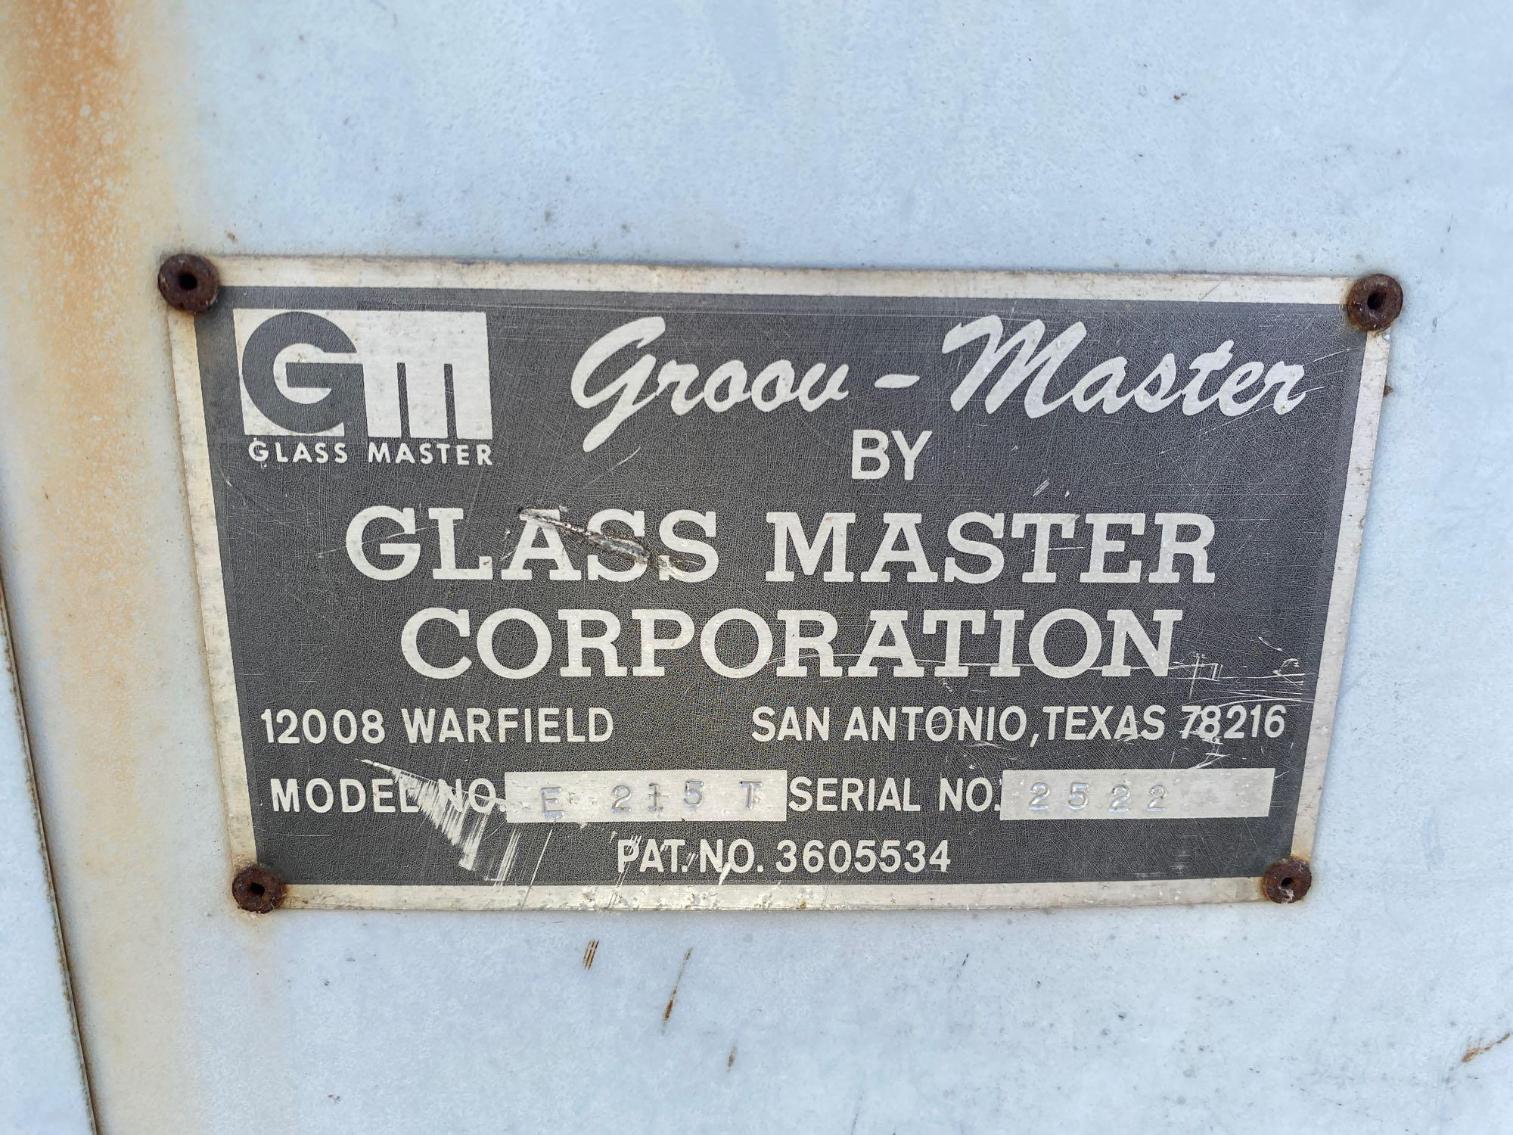 Image for Groov - Master , by Glass Master Corporation 